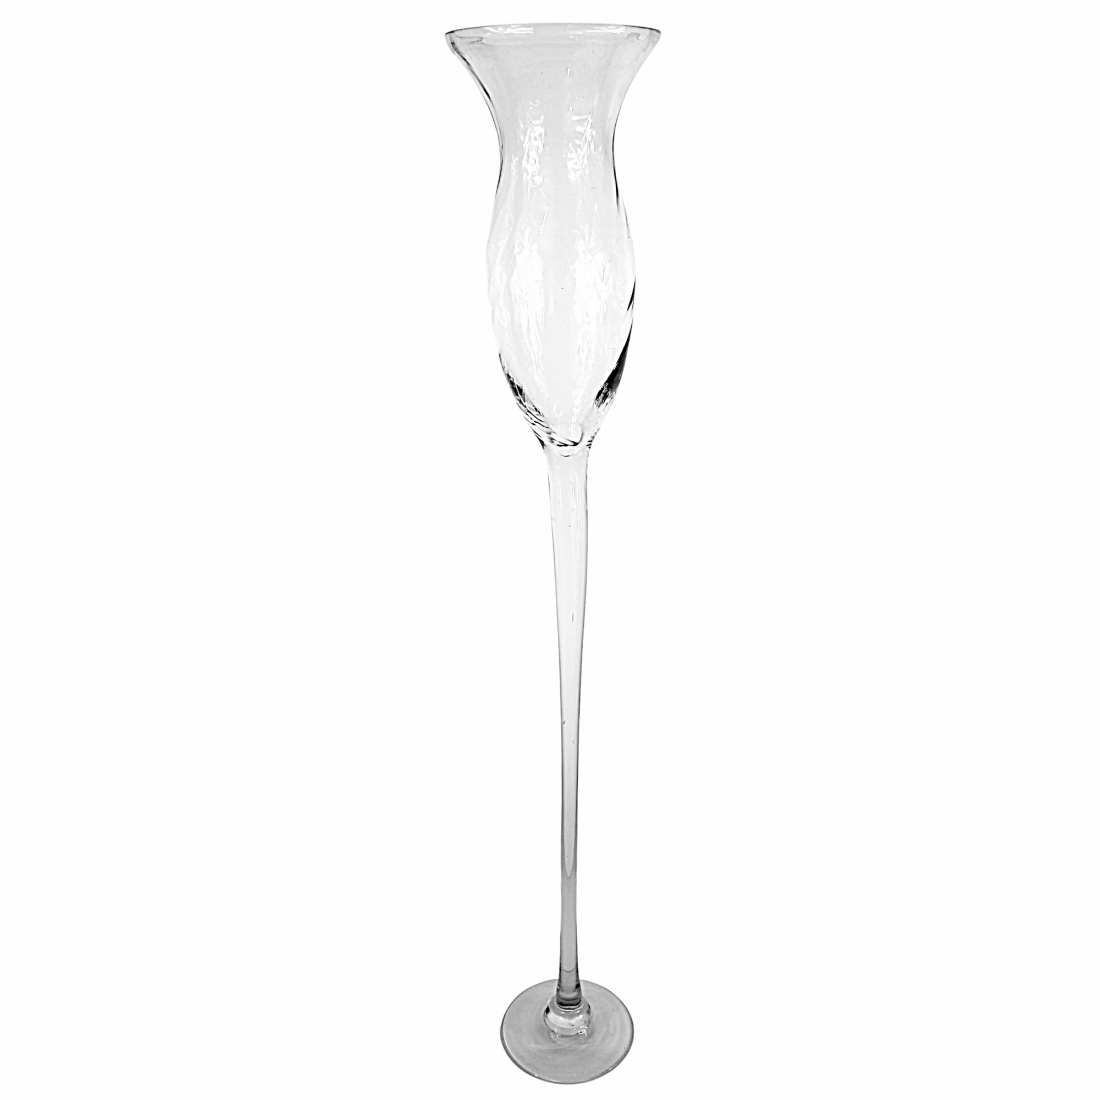 Clear glass vase 40 inches tall # 830529